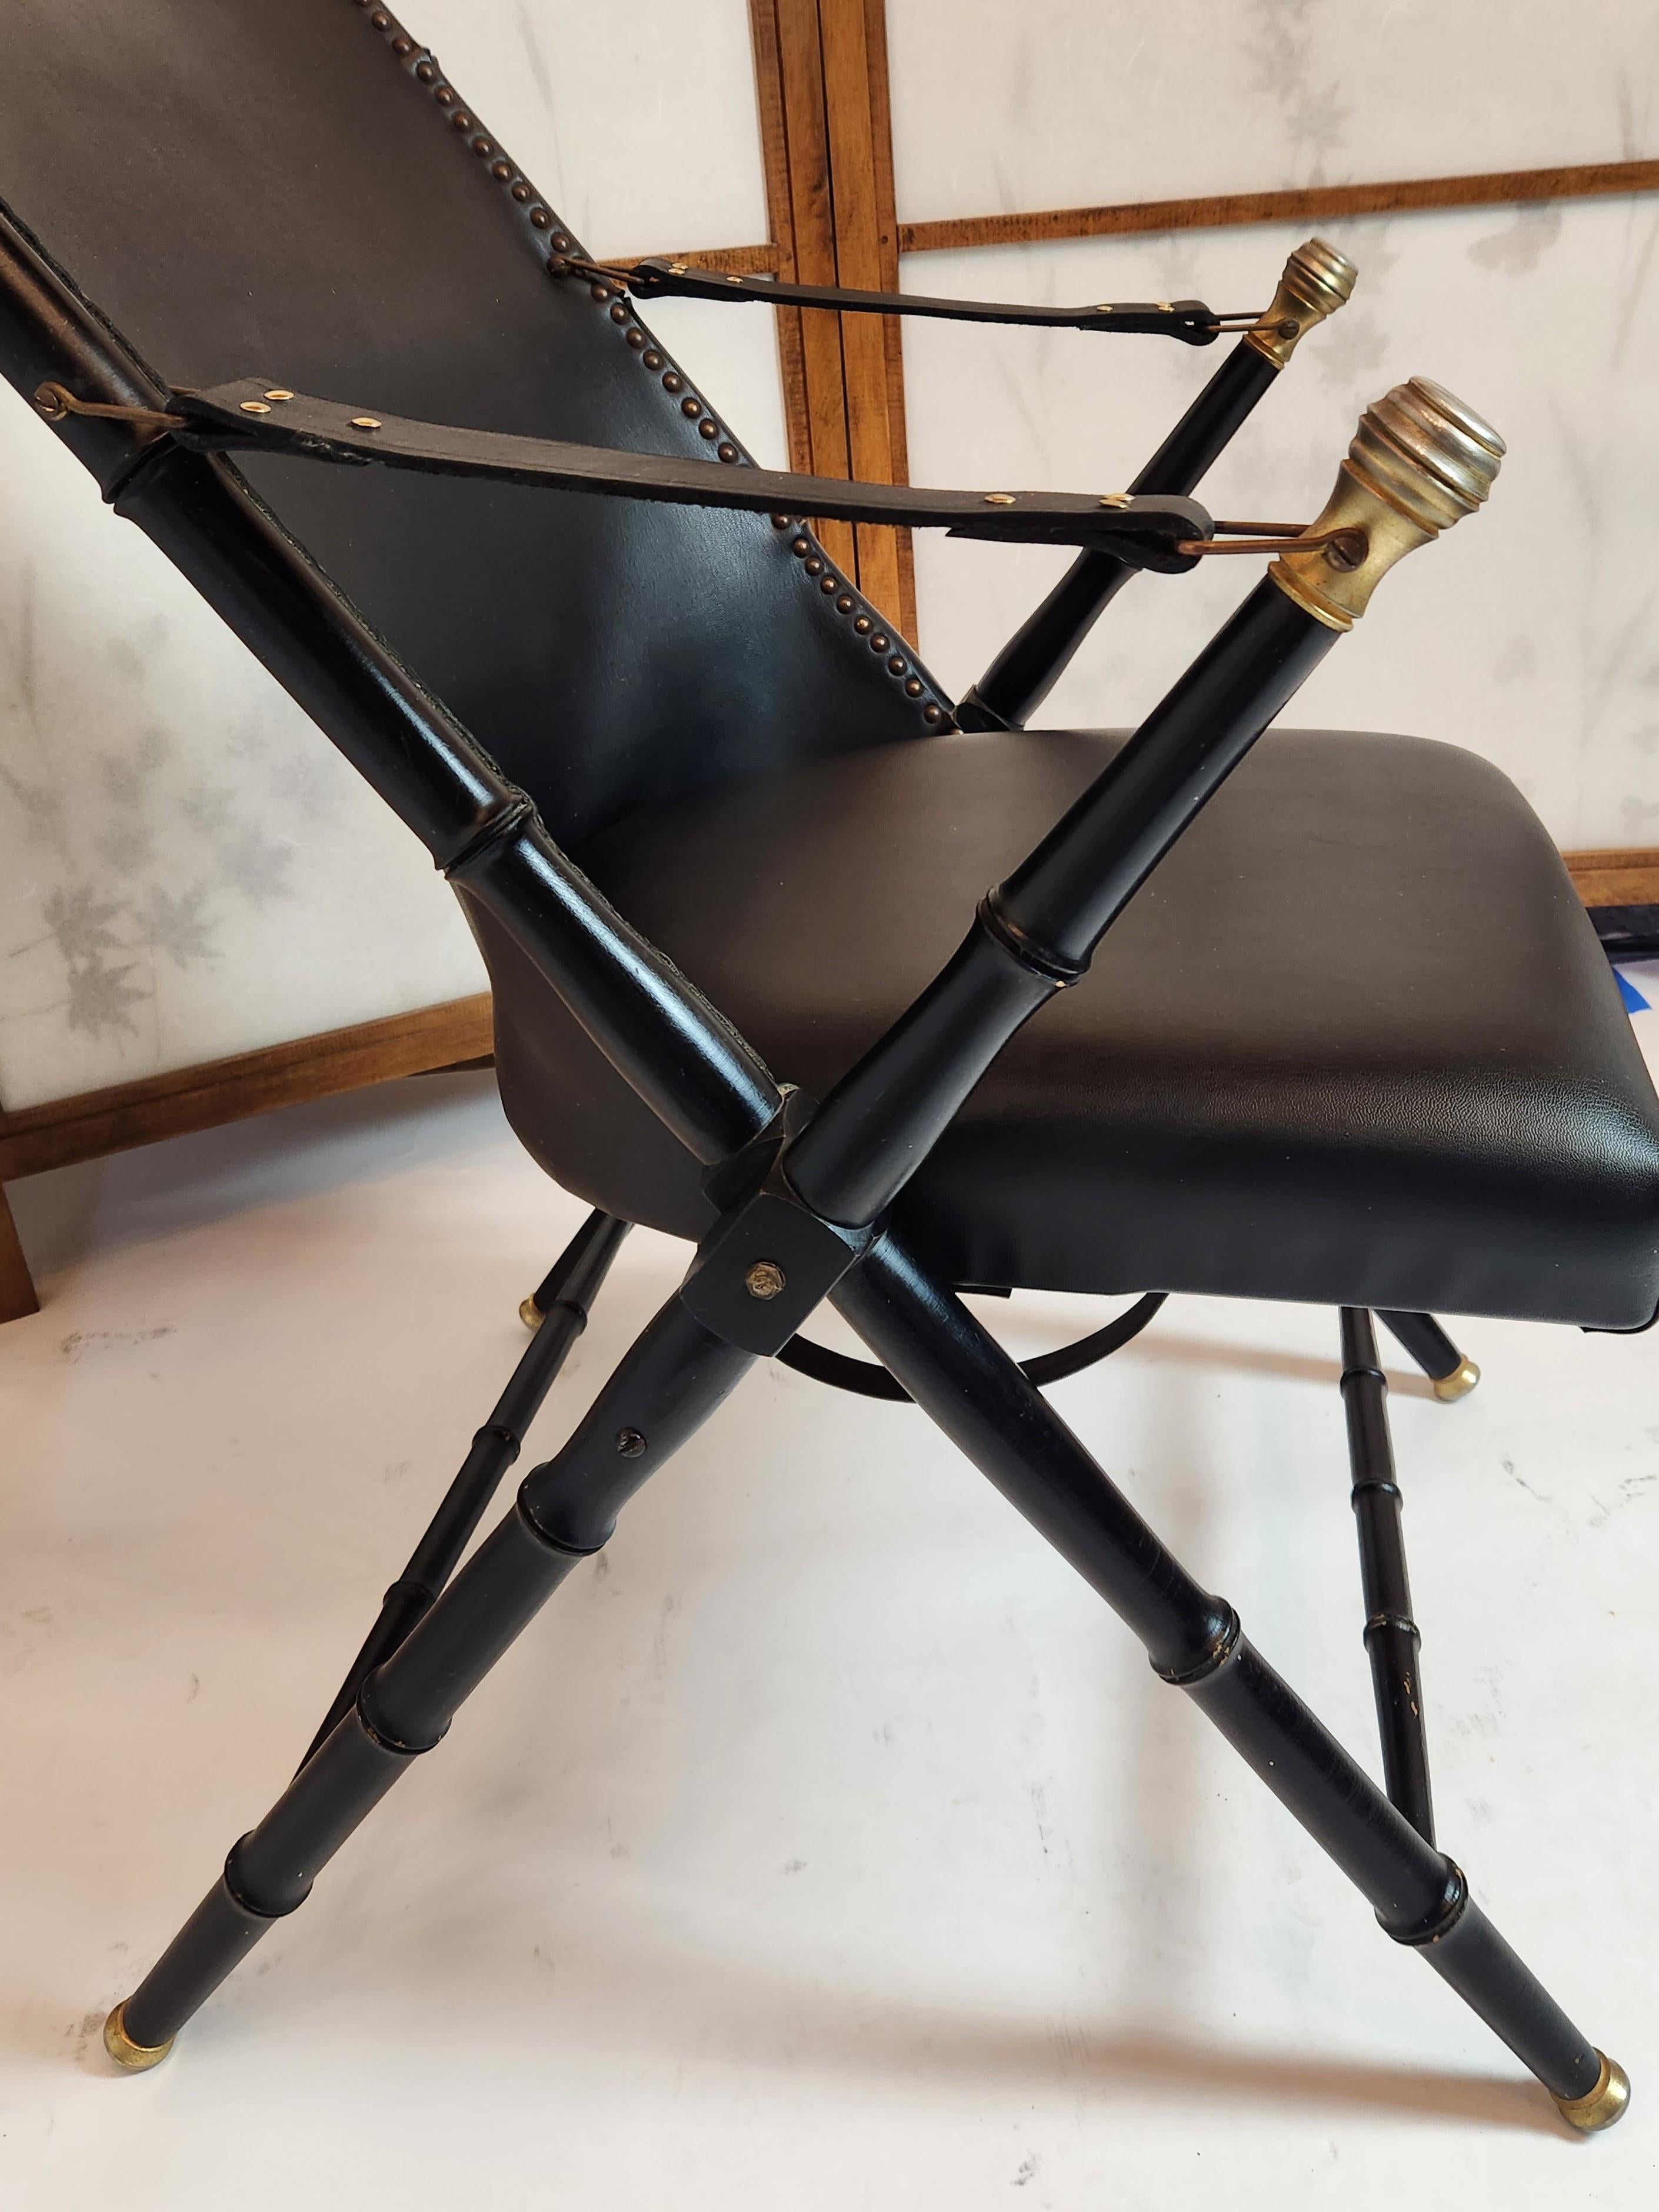 A classic Italian design, with an ebonized folding wood frame carved to appear as bamboo, cast brass caps, immaculate leather seat and back with brass nailhead trim, and newly re-done leather arm straps.
A beautiful chair in very good condition.